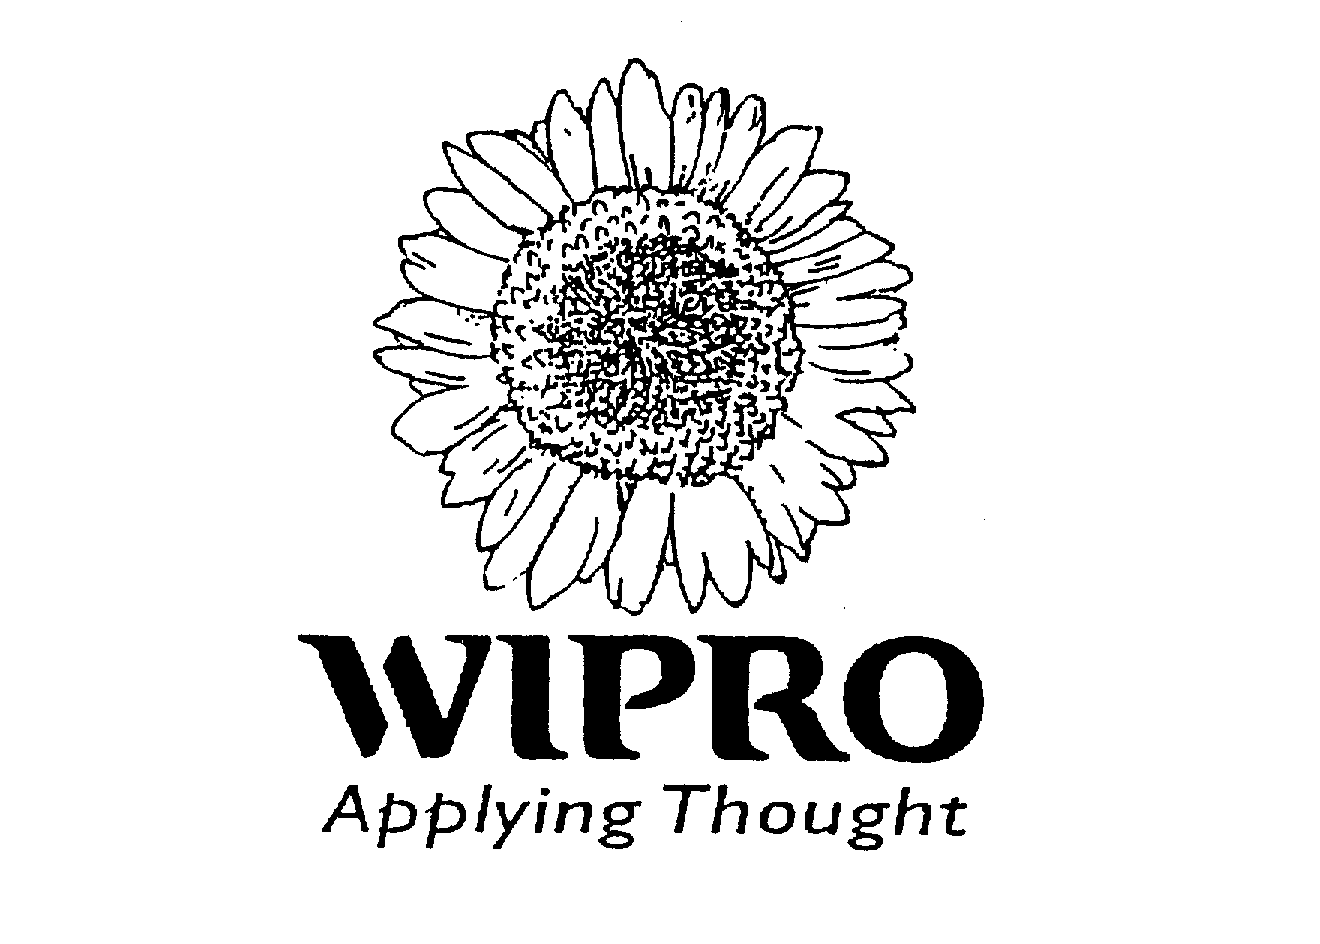  WIPRO APPLYING THOUGHT